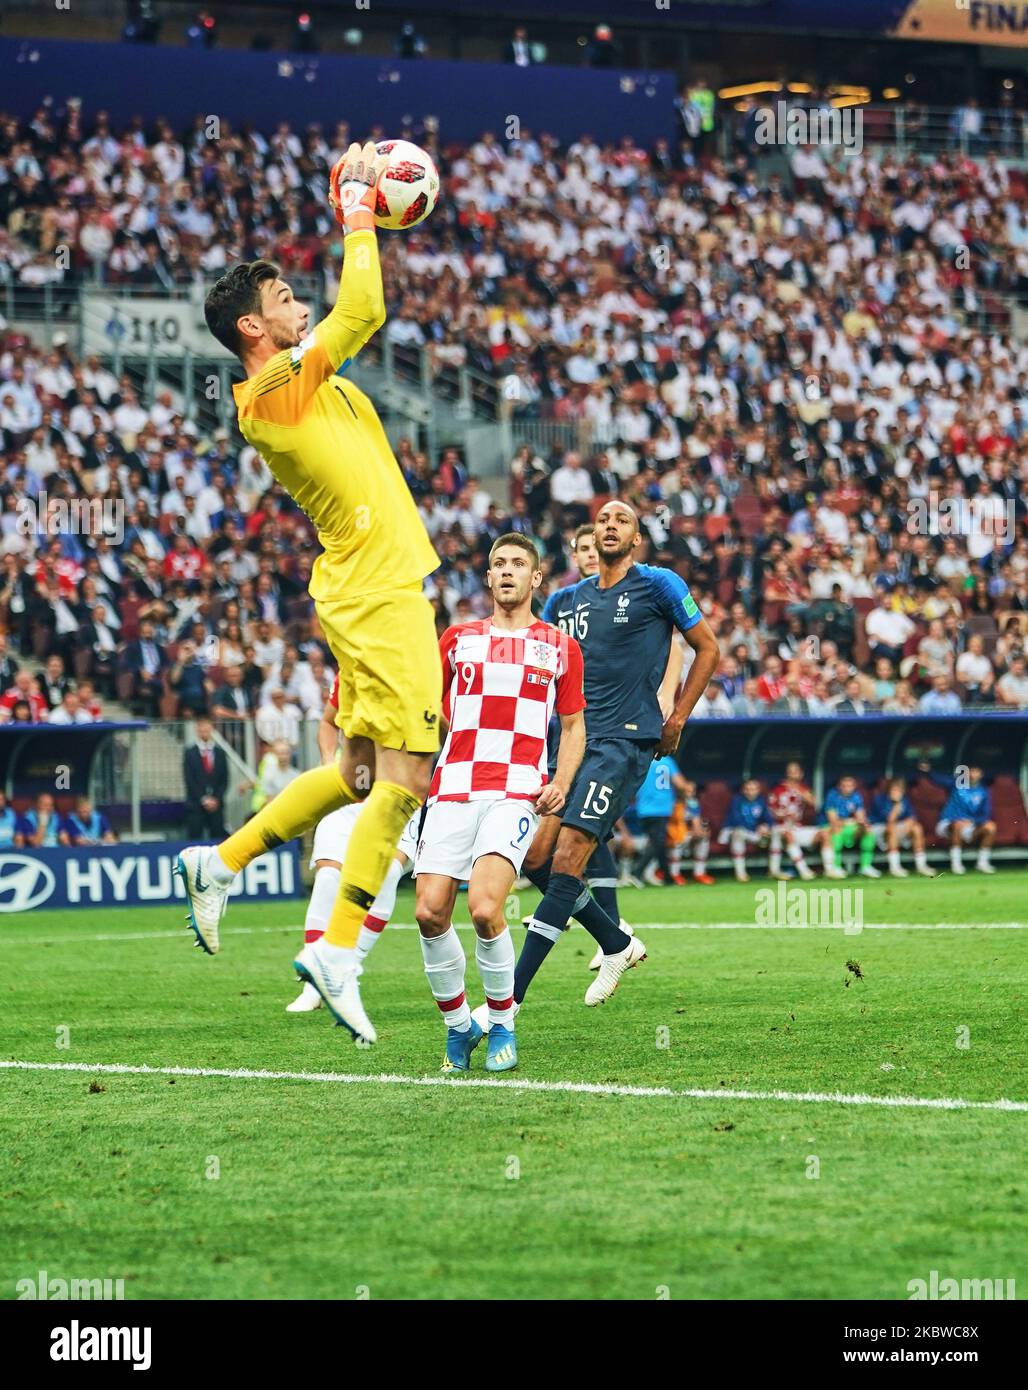 Hugo Lloris of France catching the ball during the FIFA World Cup match France versus Croatia at Luzhniki Stadium, Moscow, Russia on July 15, 2018. (Photo by Ulrik Pedersen/NurPhoto) Stock Photo